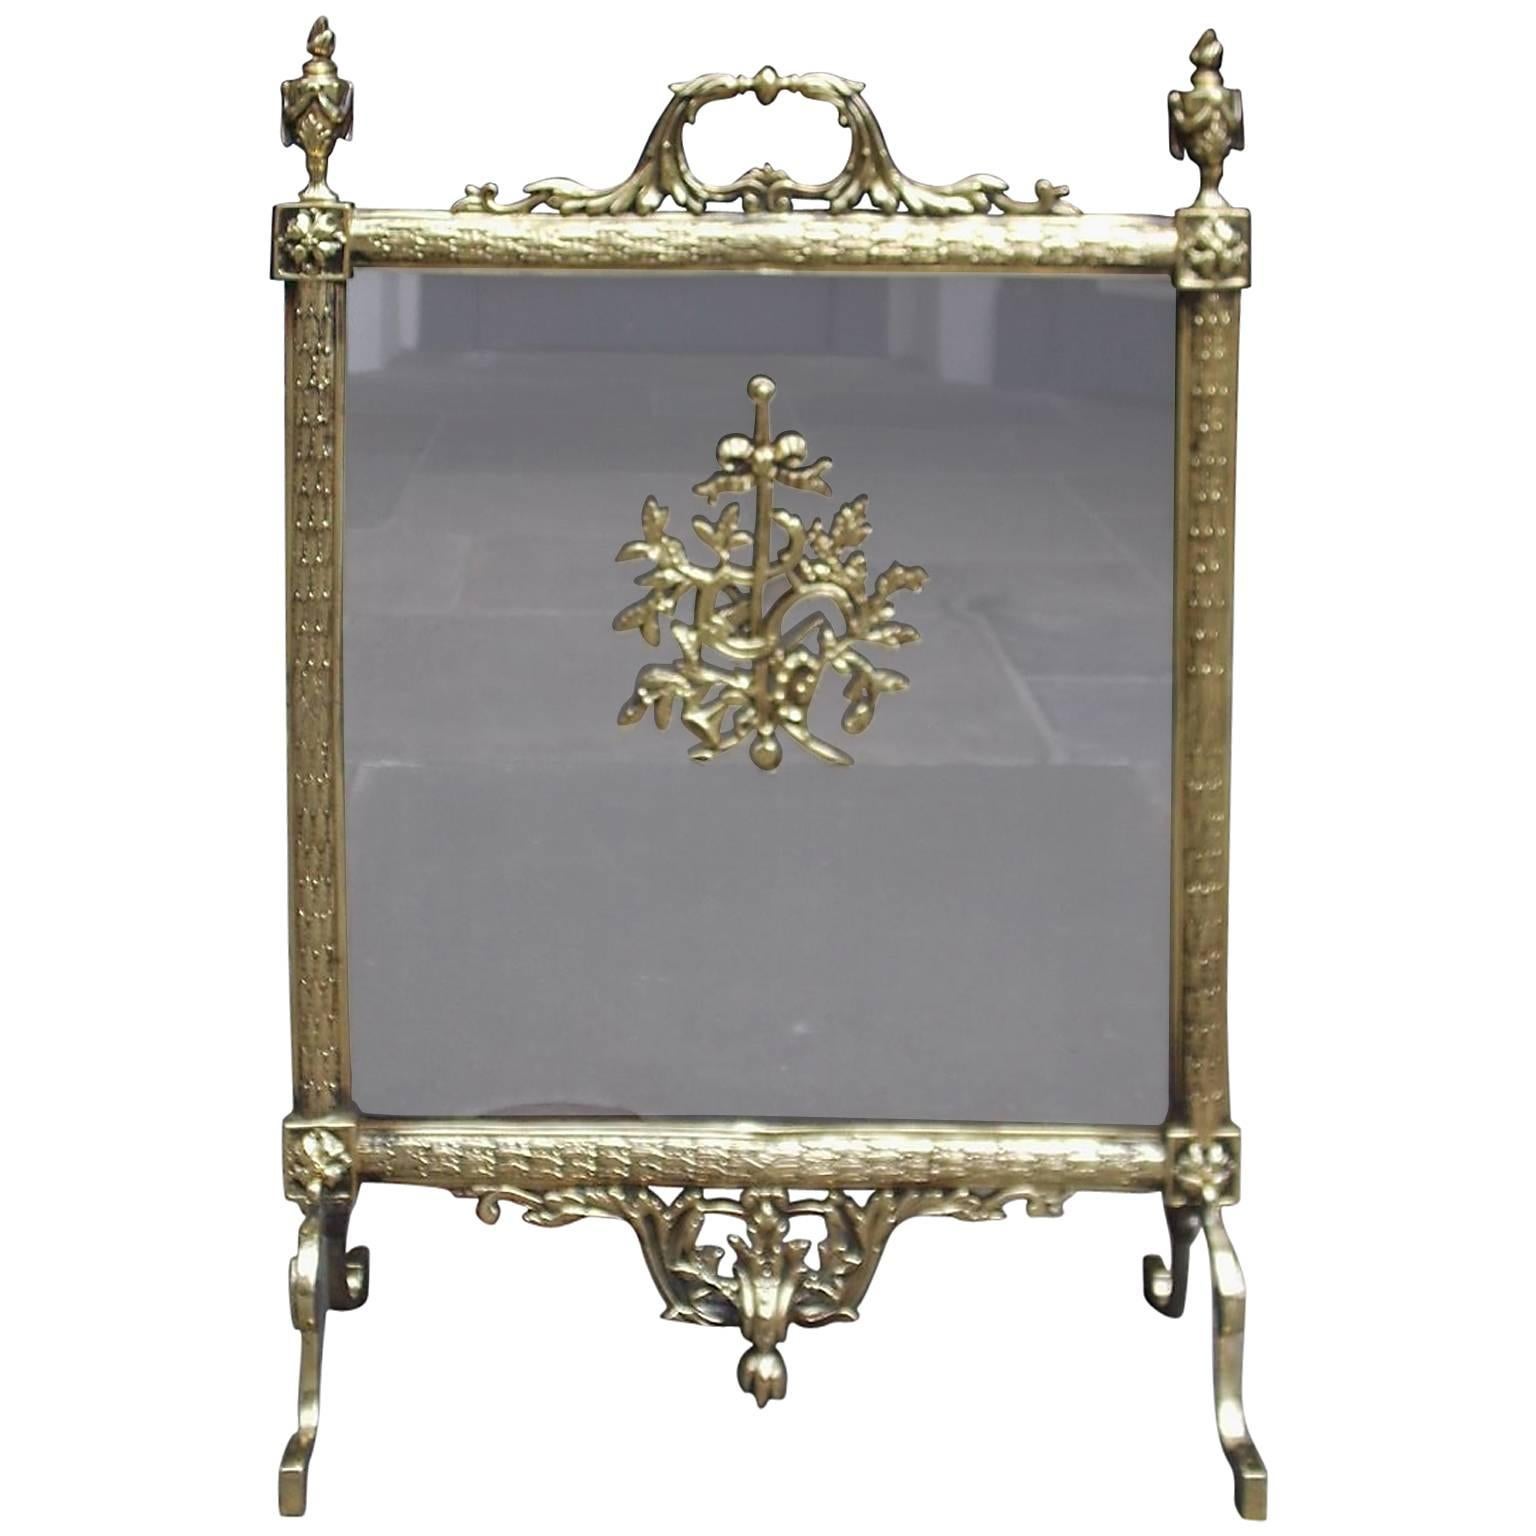 French Brass Lyre & Floral Acanthus Free Standing Fire Screen, Circa 1830